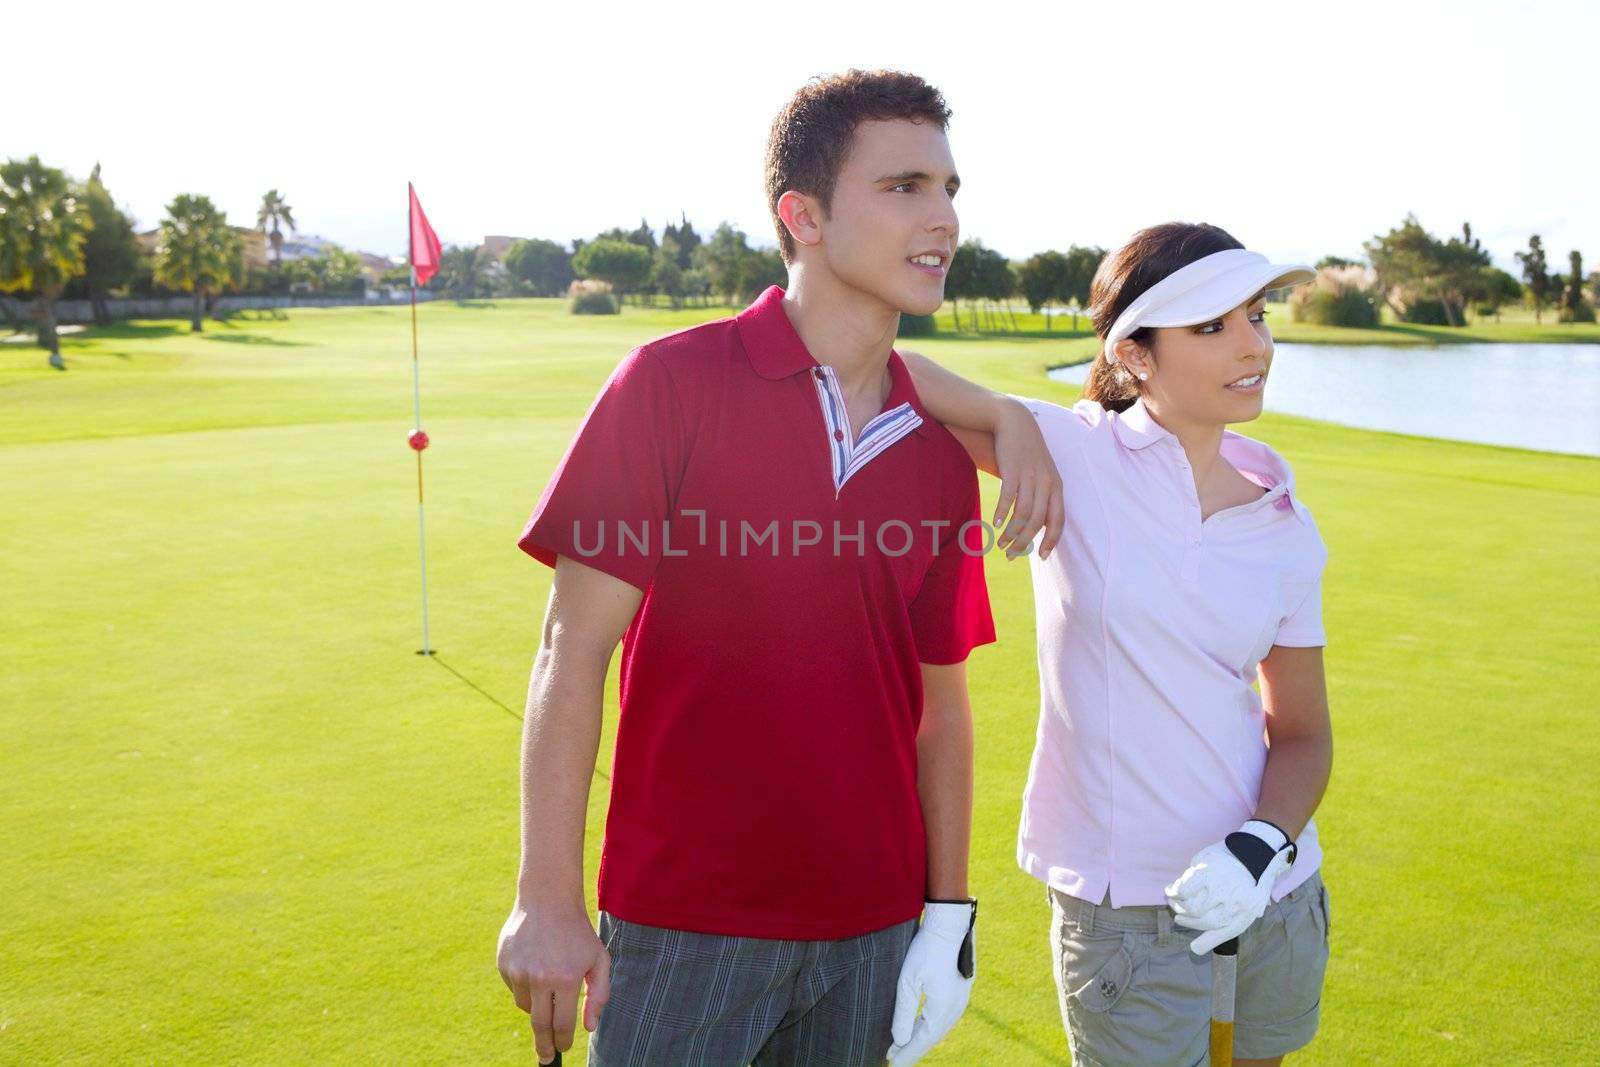 Golf course young happy players couple stand up posing on green